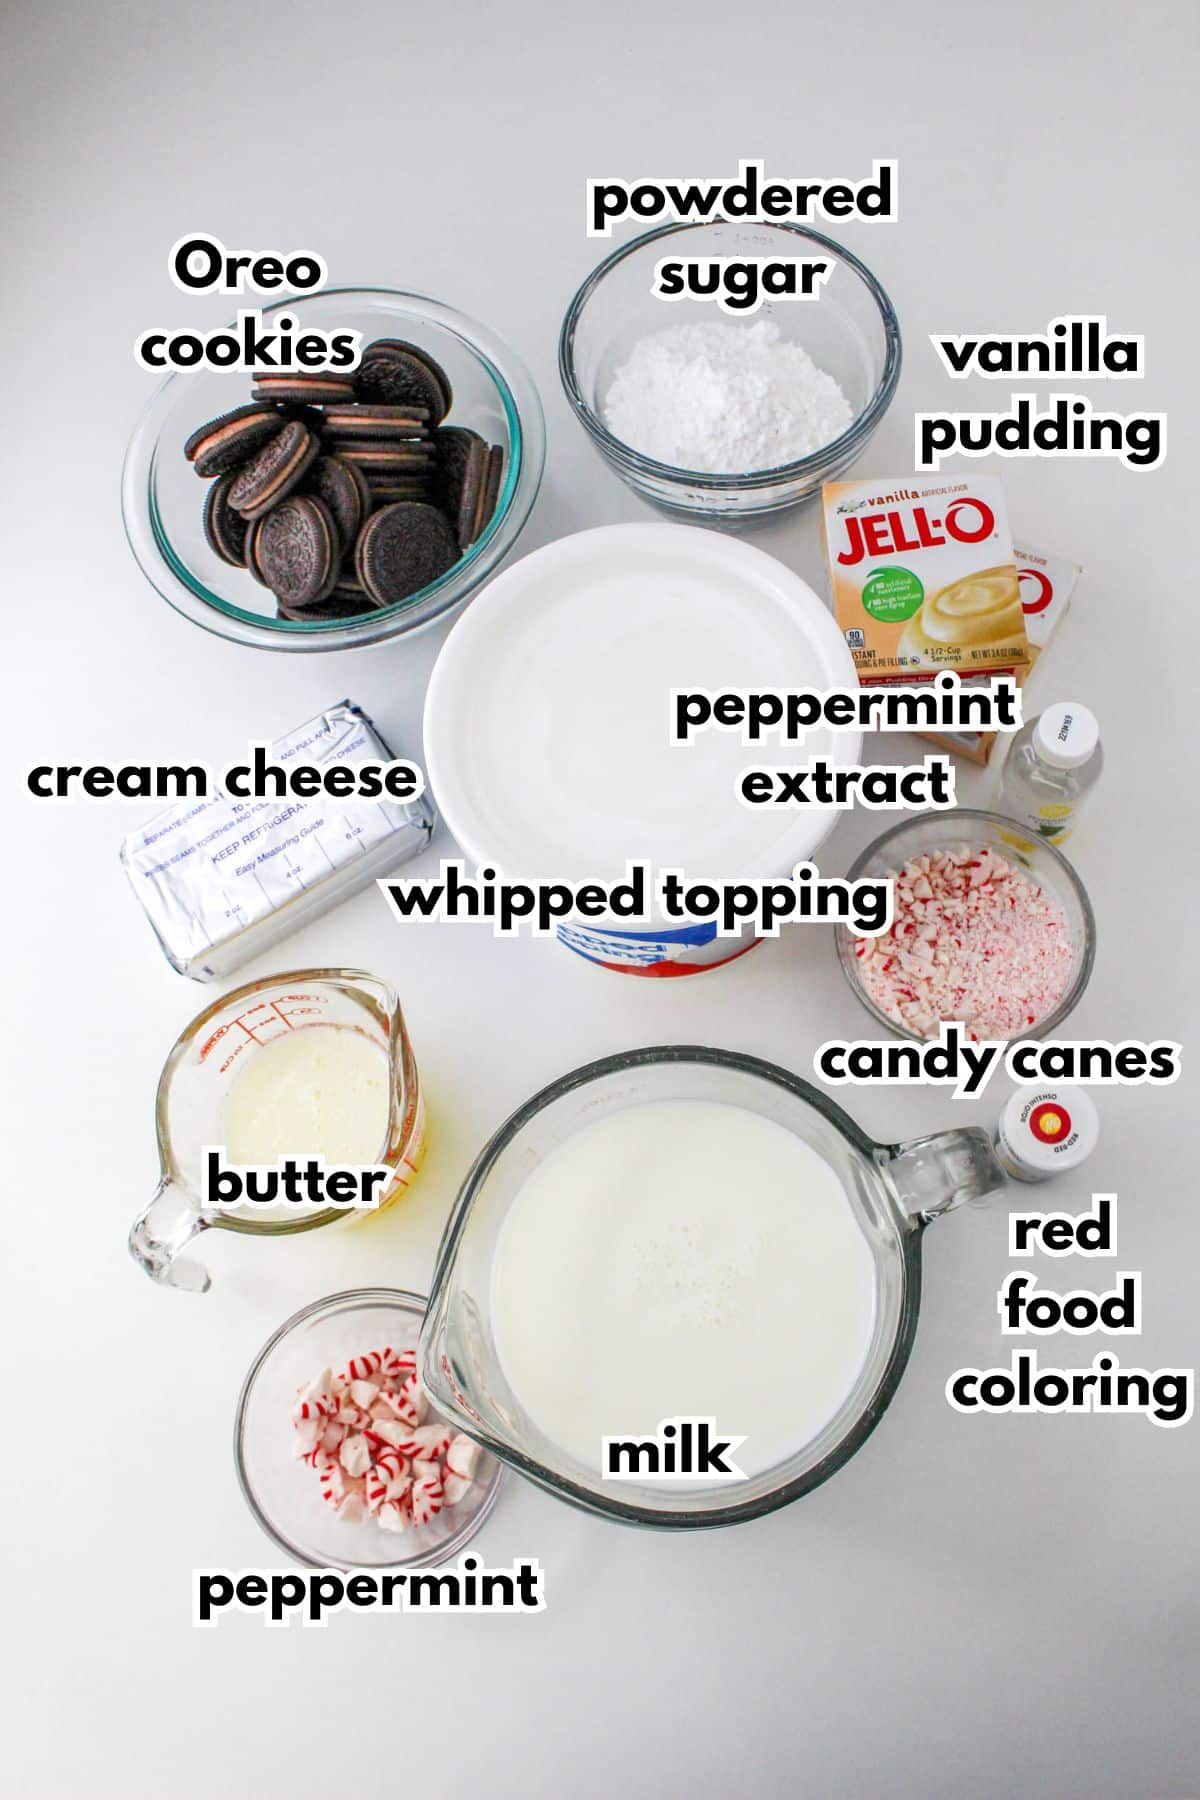 bowls of Oreo cookies, powdered sugar, cream cheese, peppermint extract, vanilla pudding boxes, whipped topping, butter, candy canes, milk, red food coloring and peppermint candies.